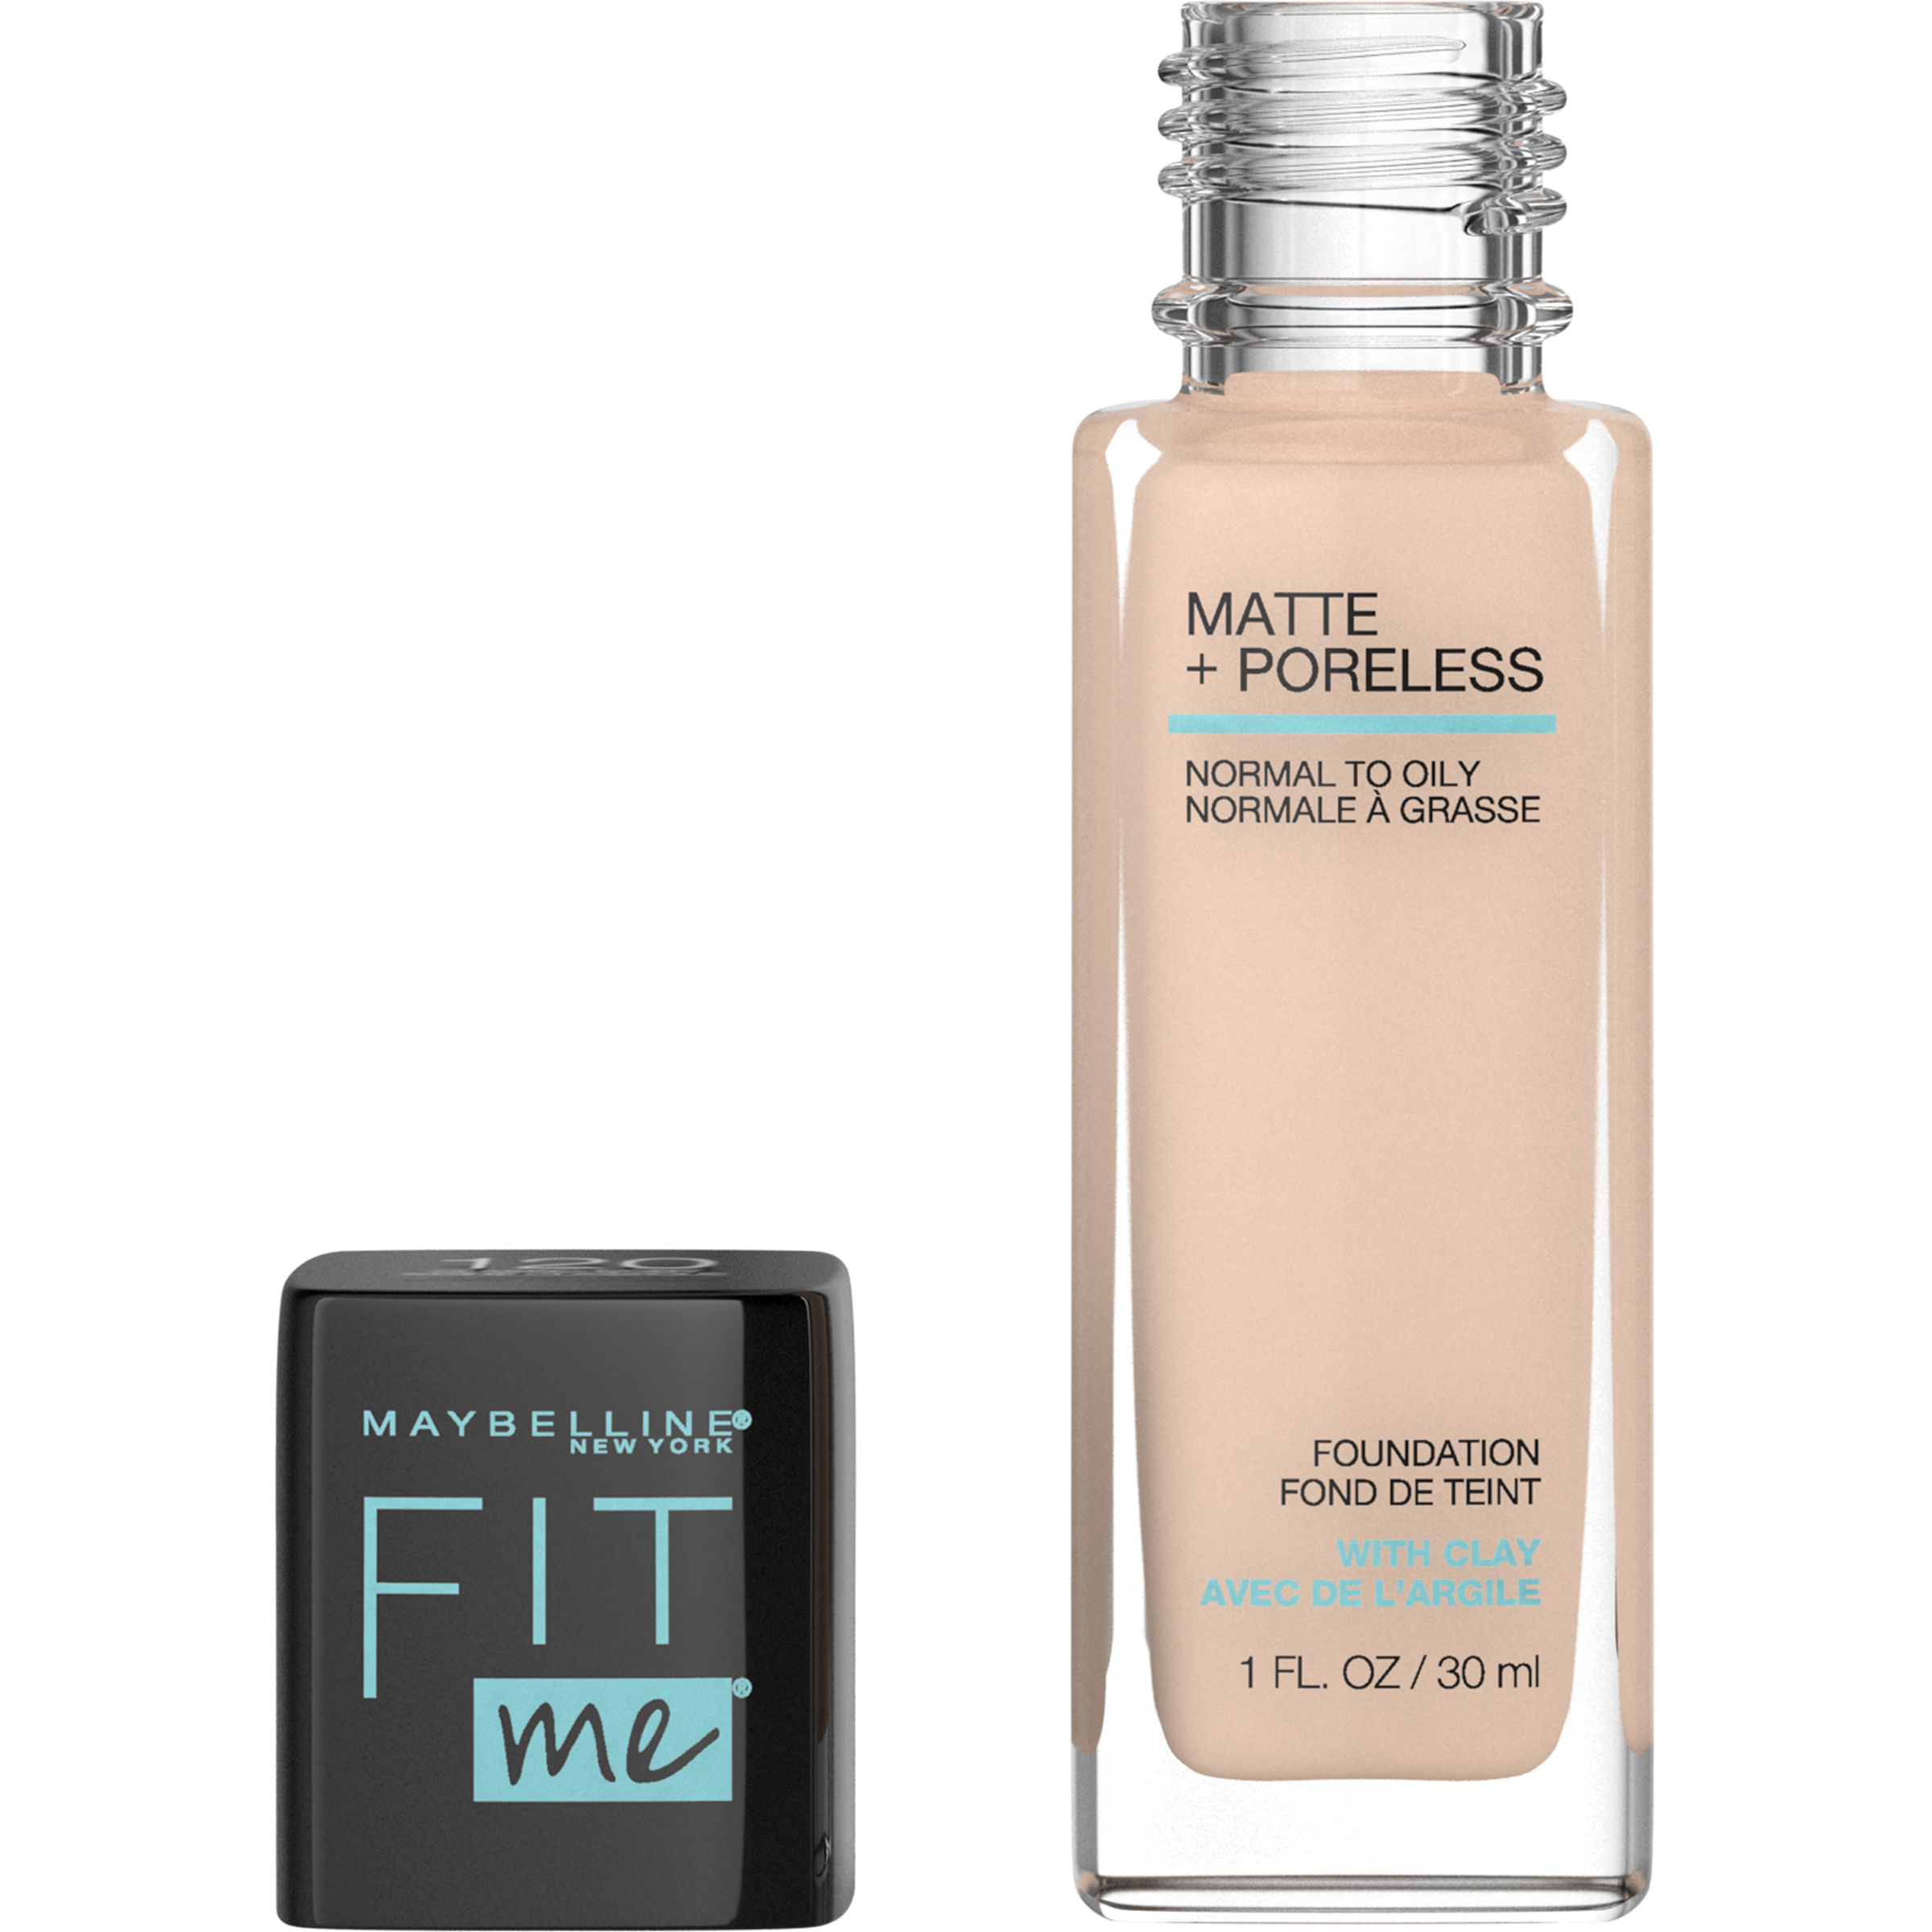 Comprar Maquillaje Maybelline Fit Me Matte 120Classic